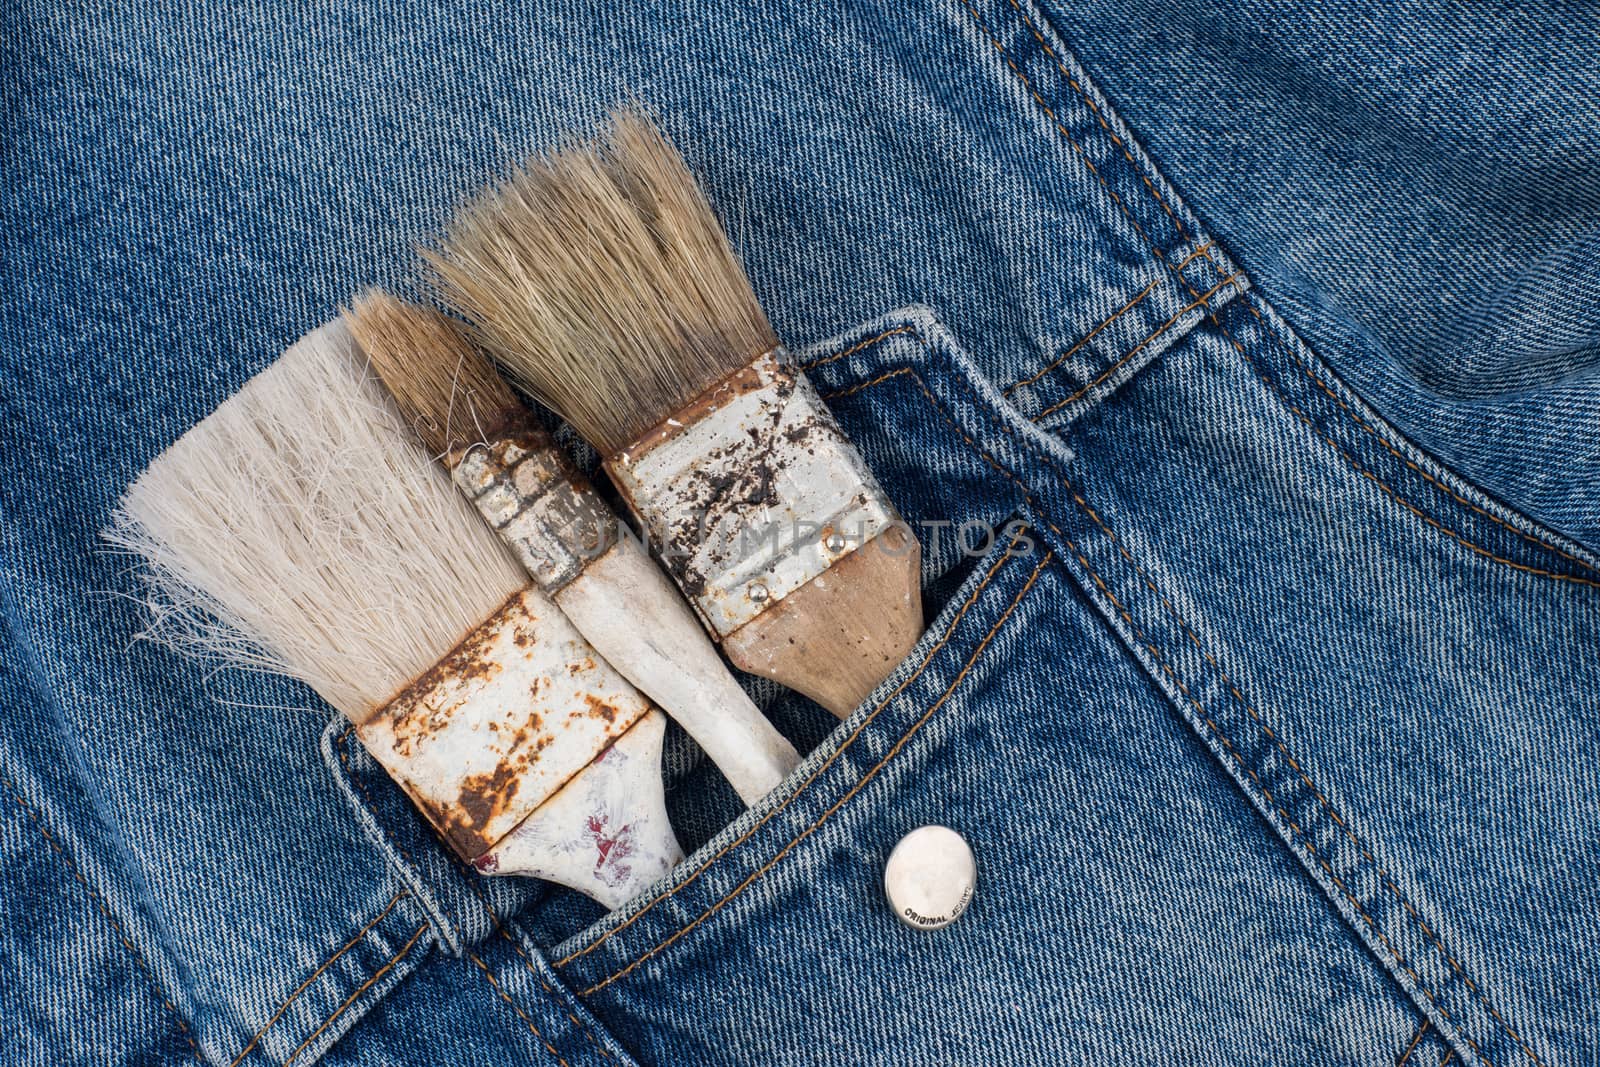 paint brushes in jeans pocket by DGolbay